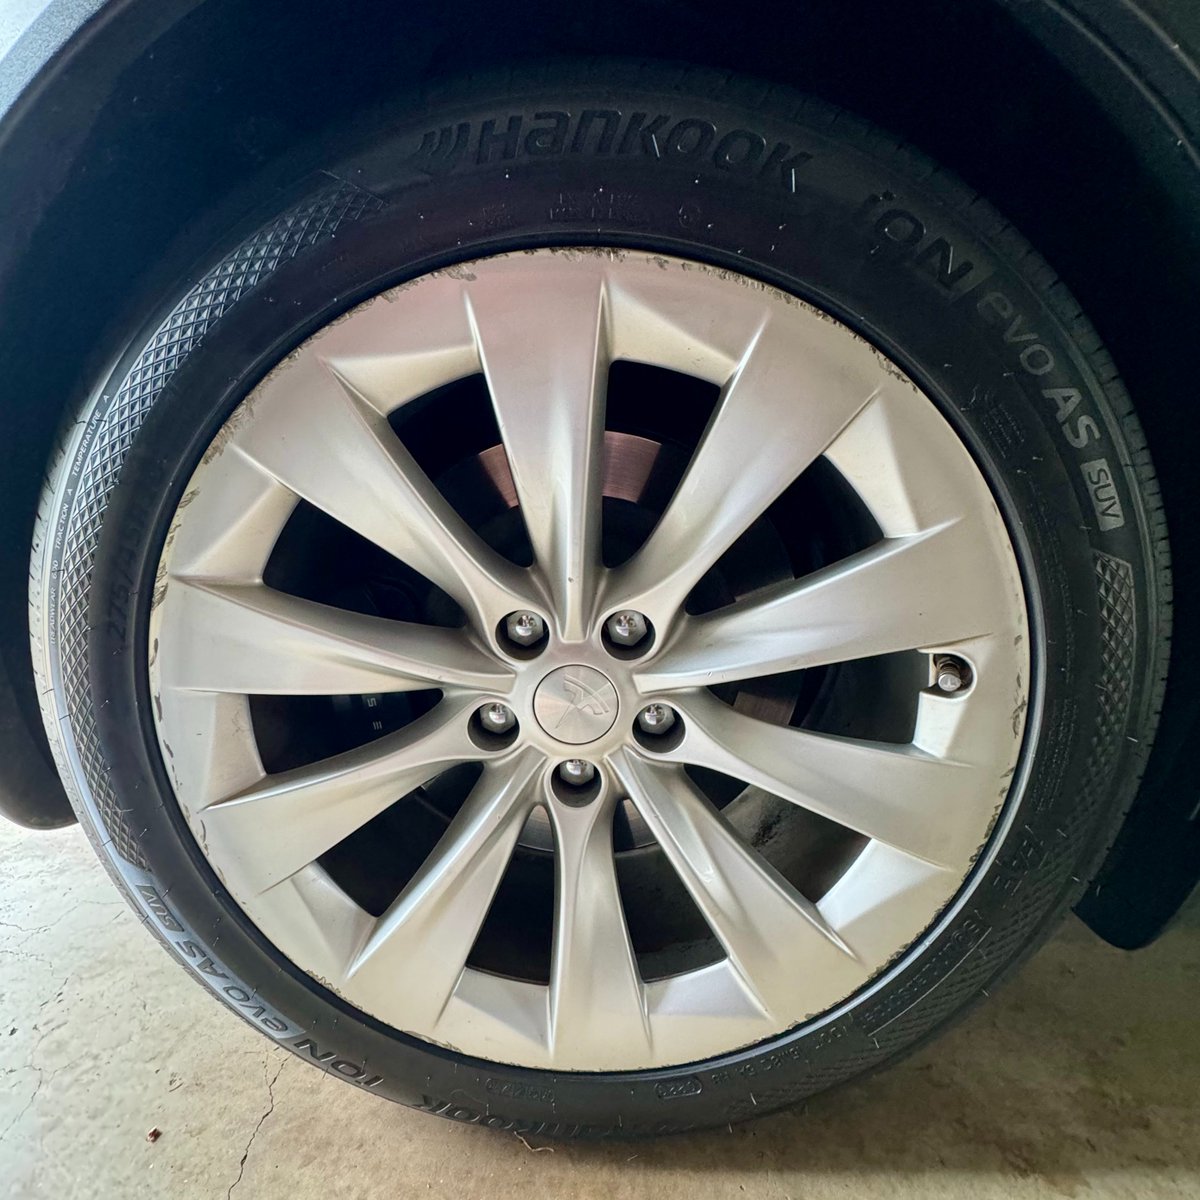 New boots for the Model X ... Hankook iON EVO AS SUV
Don't @ me about the kerb rash.

hankooktire.com/au/en/tire/ion…